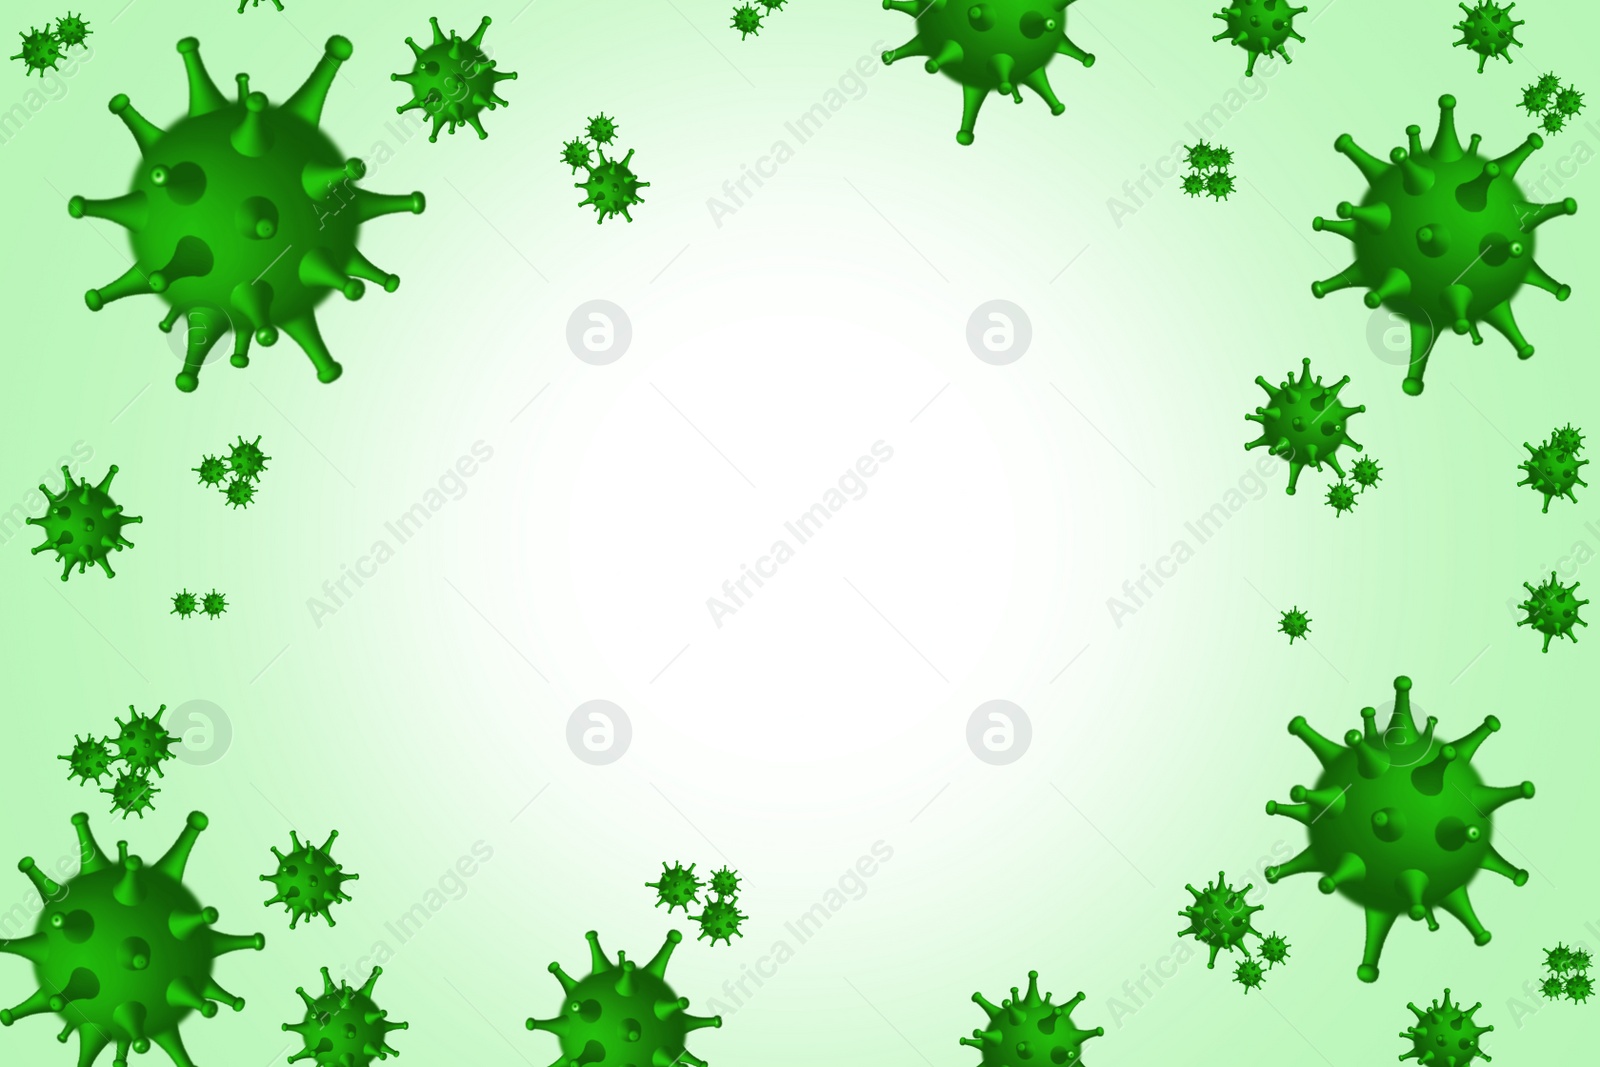 Image of Abstract illustration of virus on green background